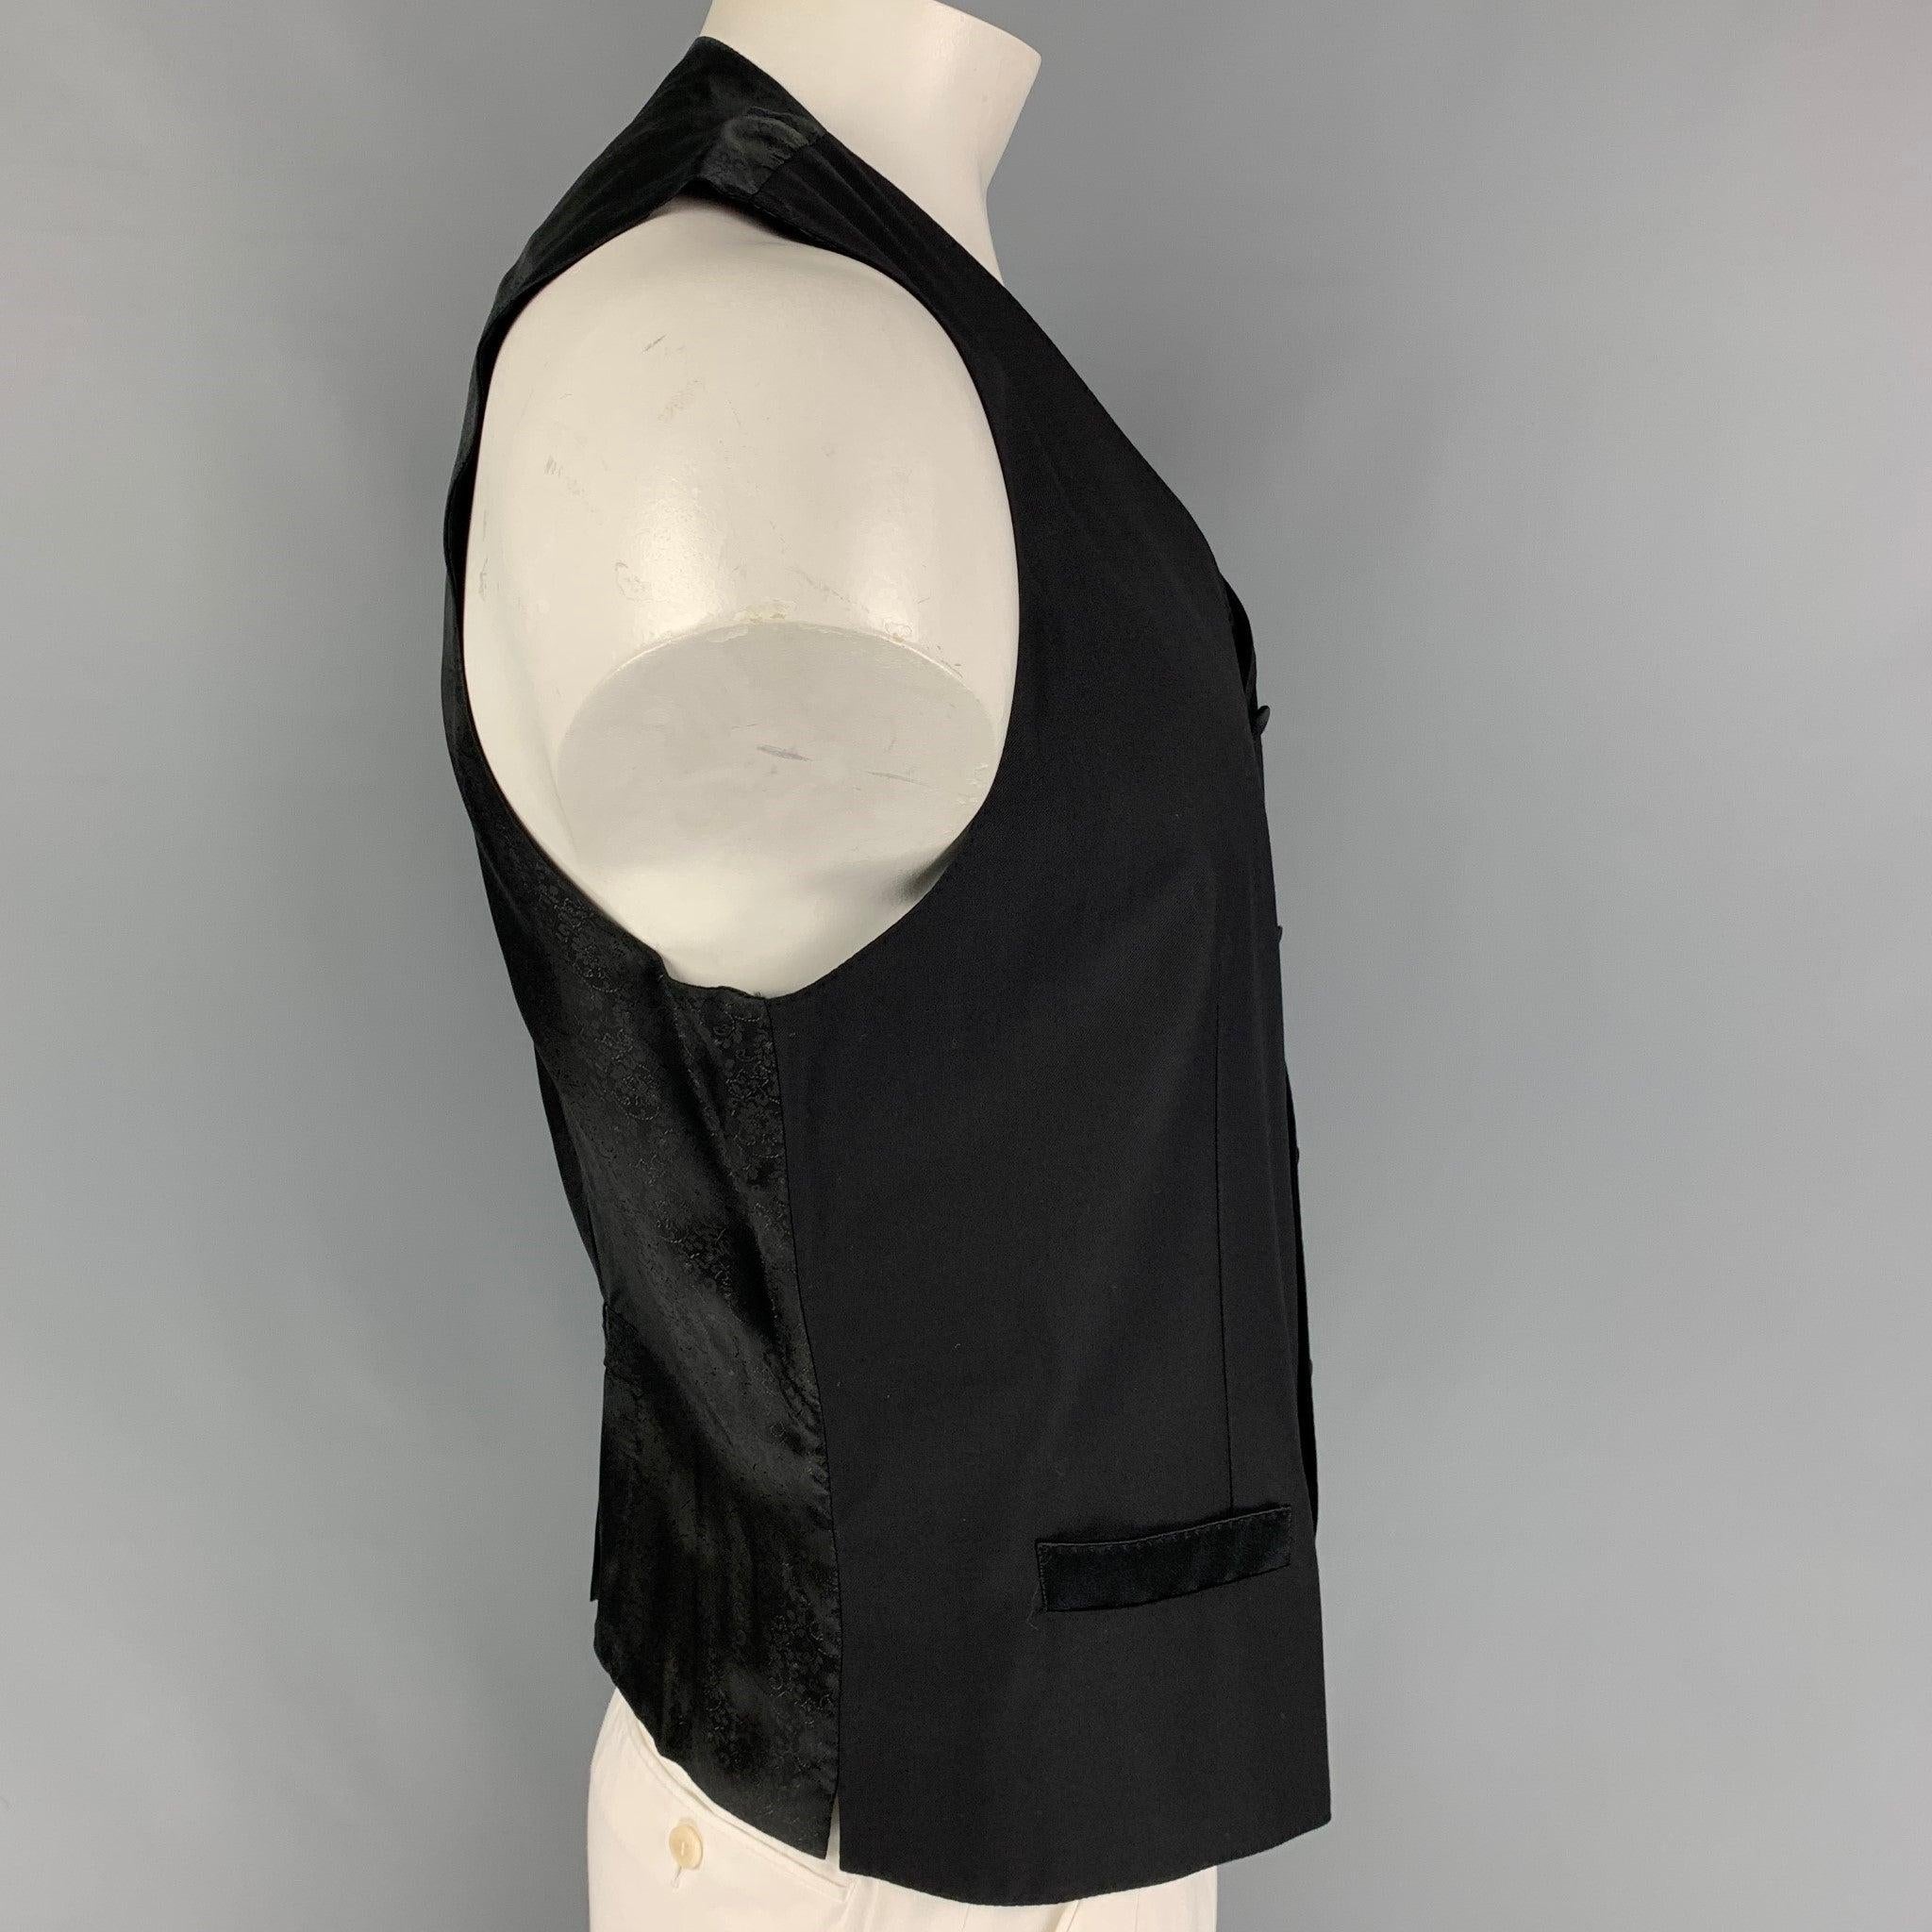 DOLCE & GABBANA vest comes in a black wool / silk featuring a back belt, slit pockets, and a buttoned closure. Made in Italy.
Very Good
Pre-Owned Condition. 

Marked:   54 

Measurements: 
 
Shoulder: 15.5 inches  Chest: 44 inches  Length: 24 inches